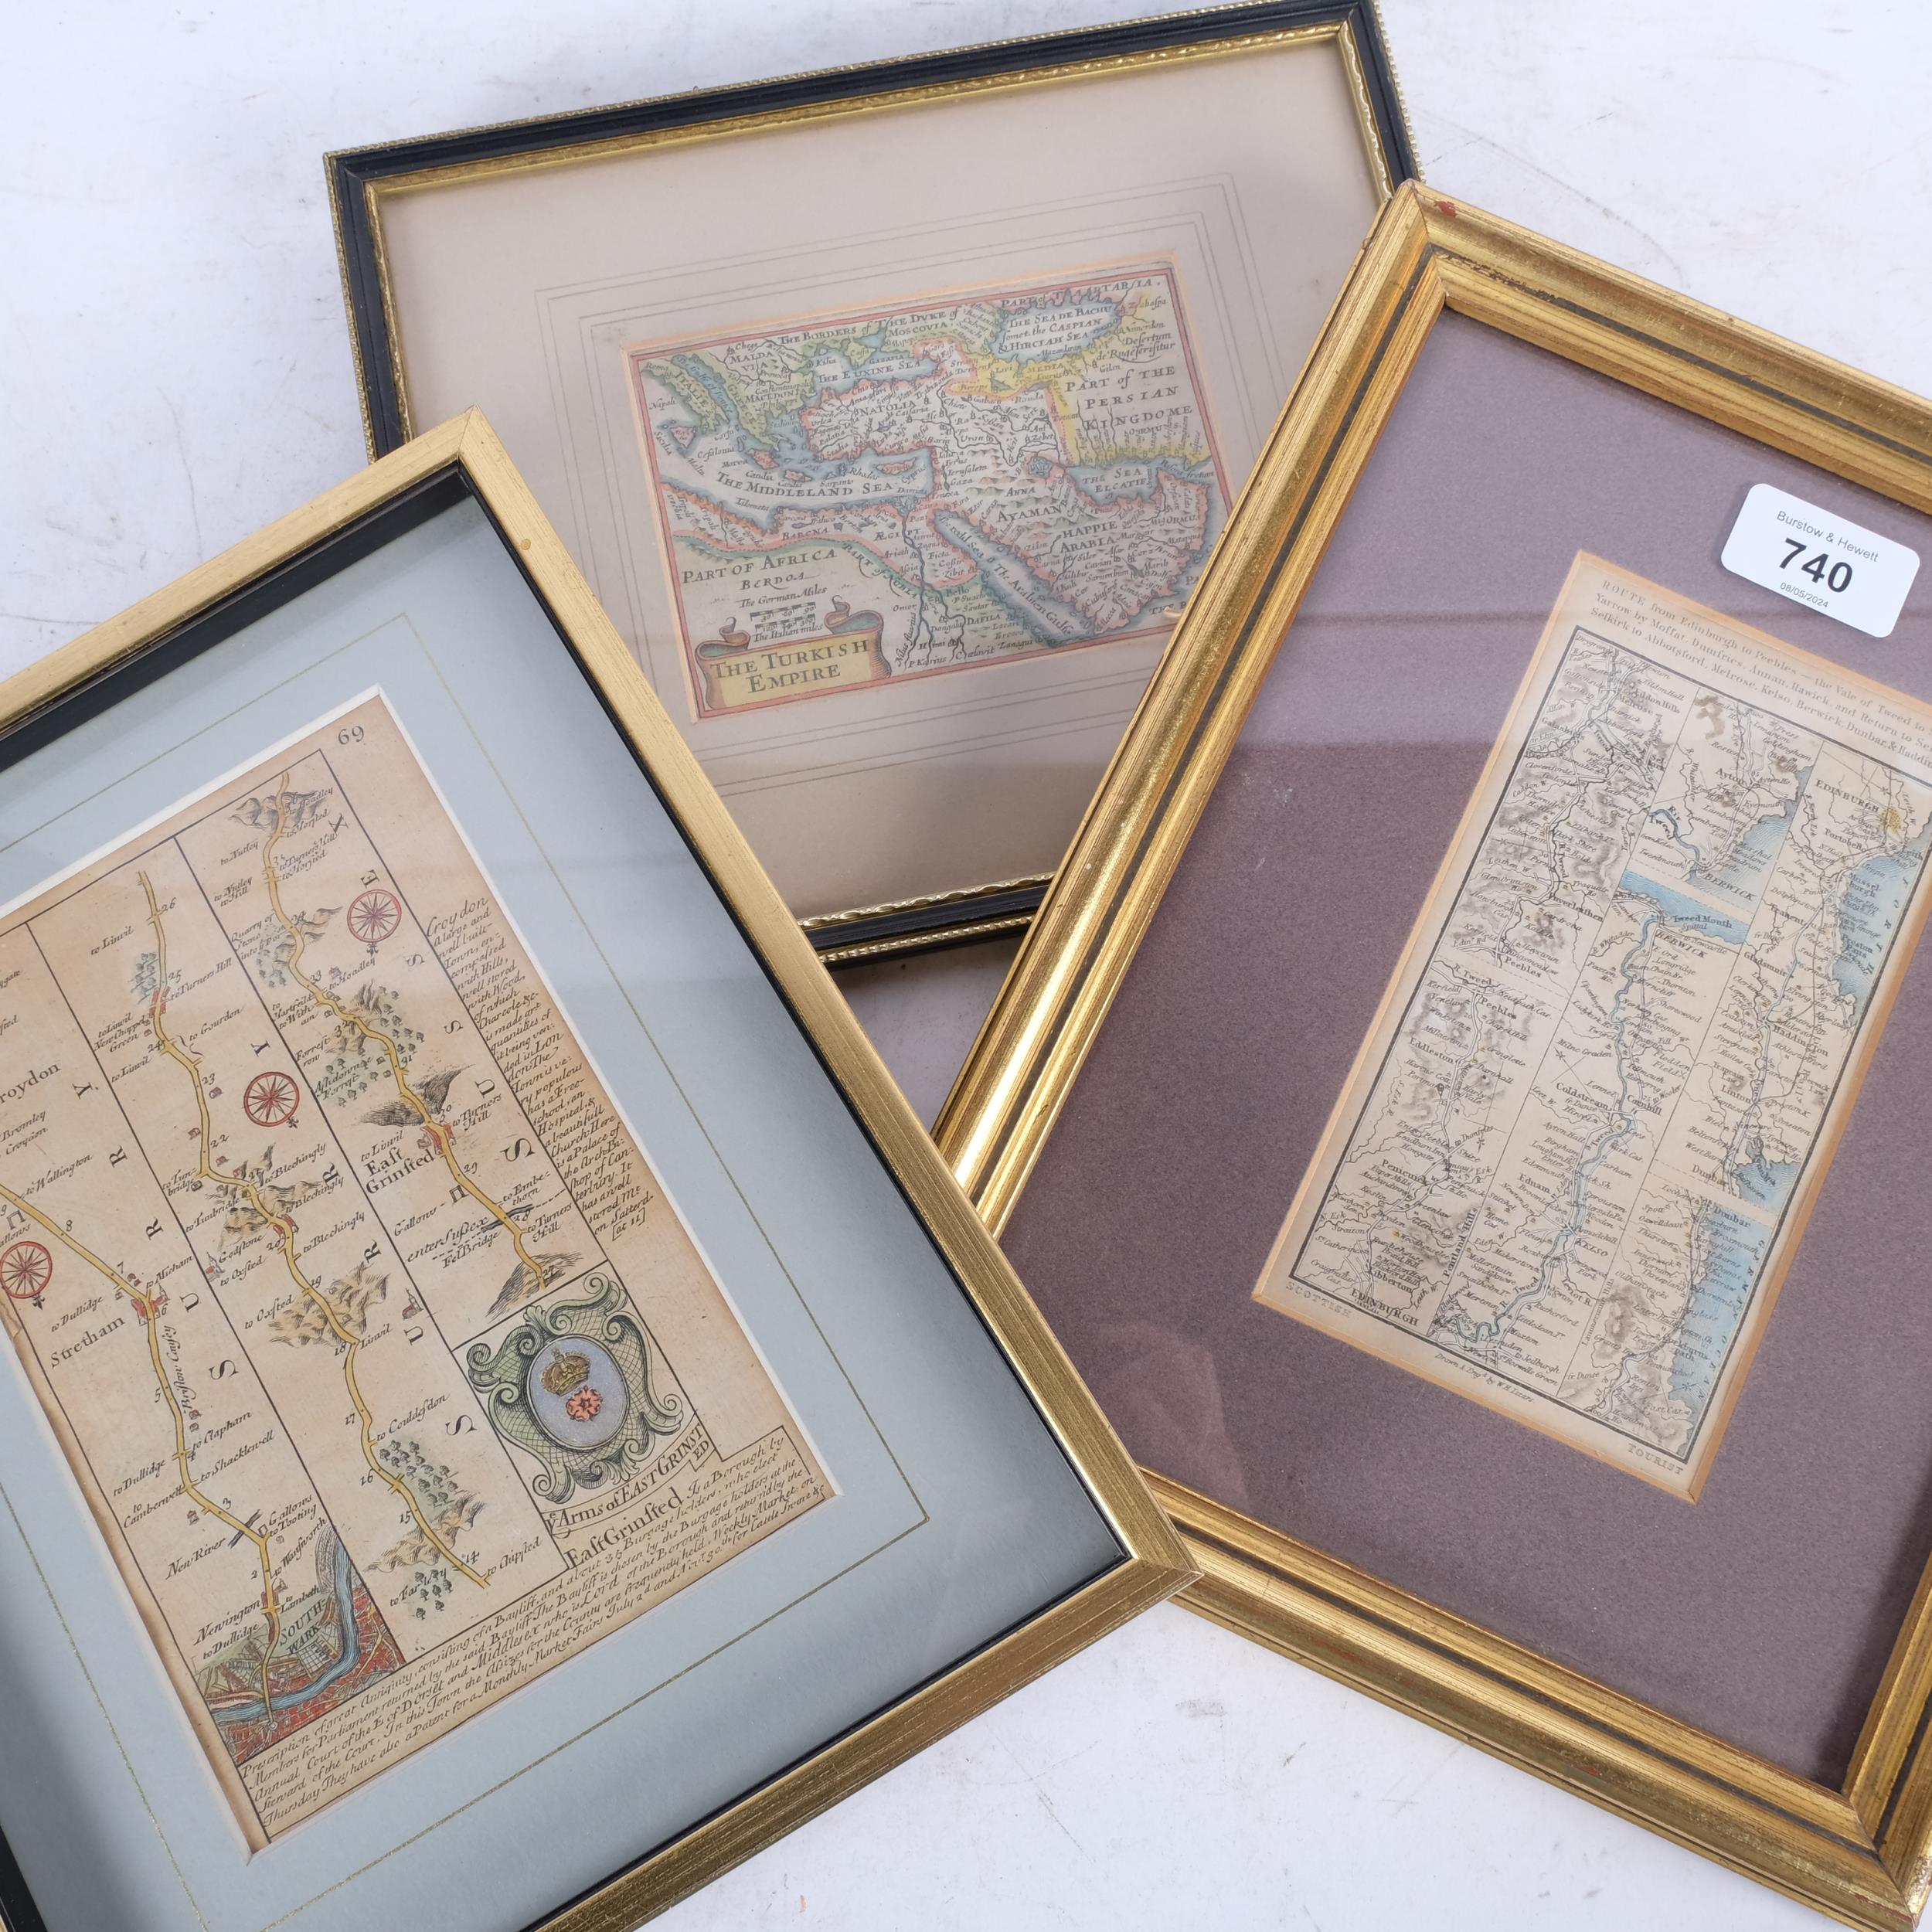 3 Antique hand coloured maps, including East Grinstead, the Turkish Empire, and the Route from - Image 2 of 2